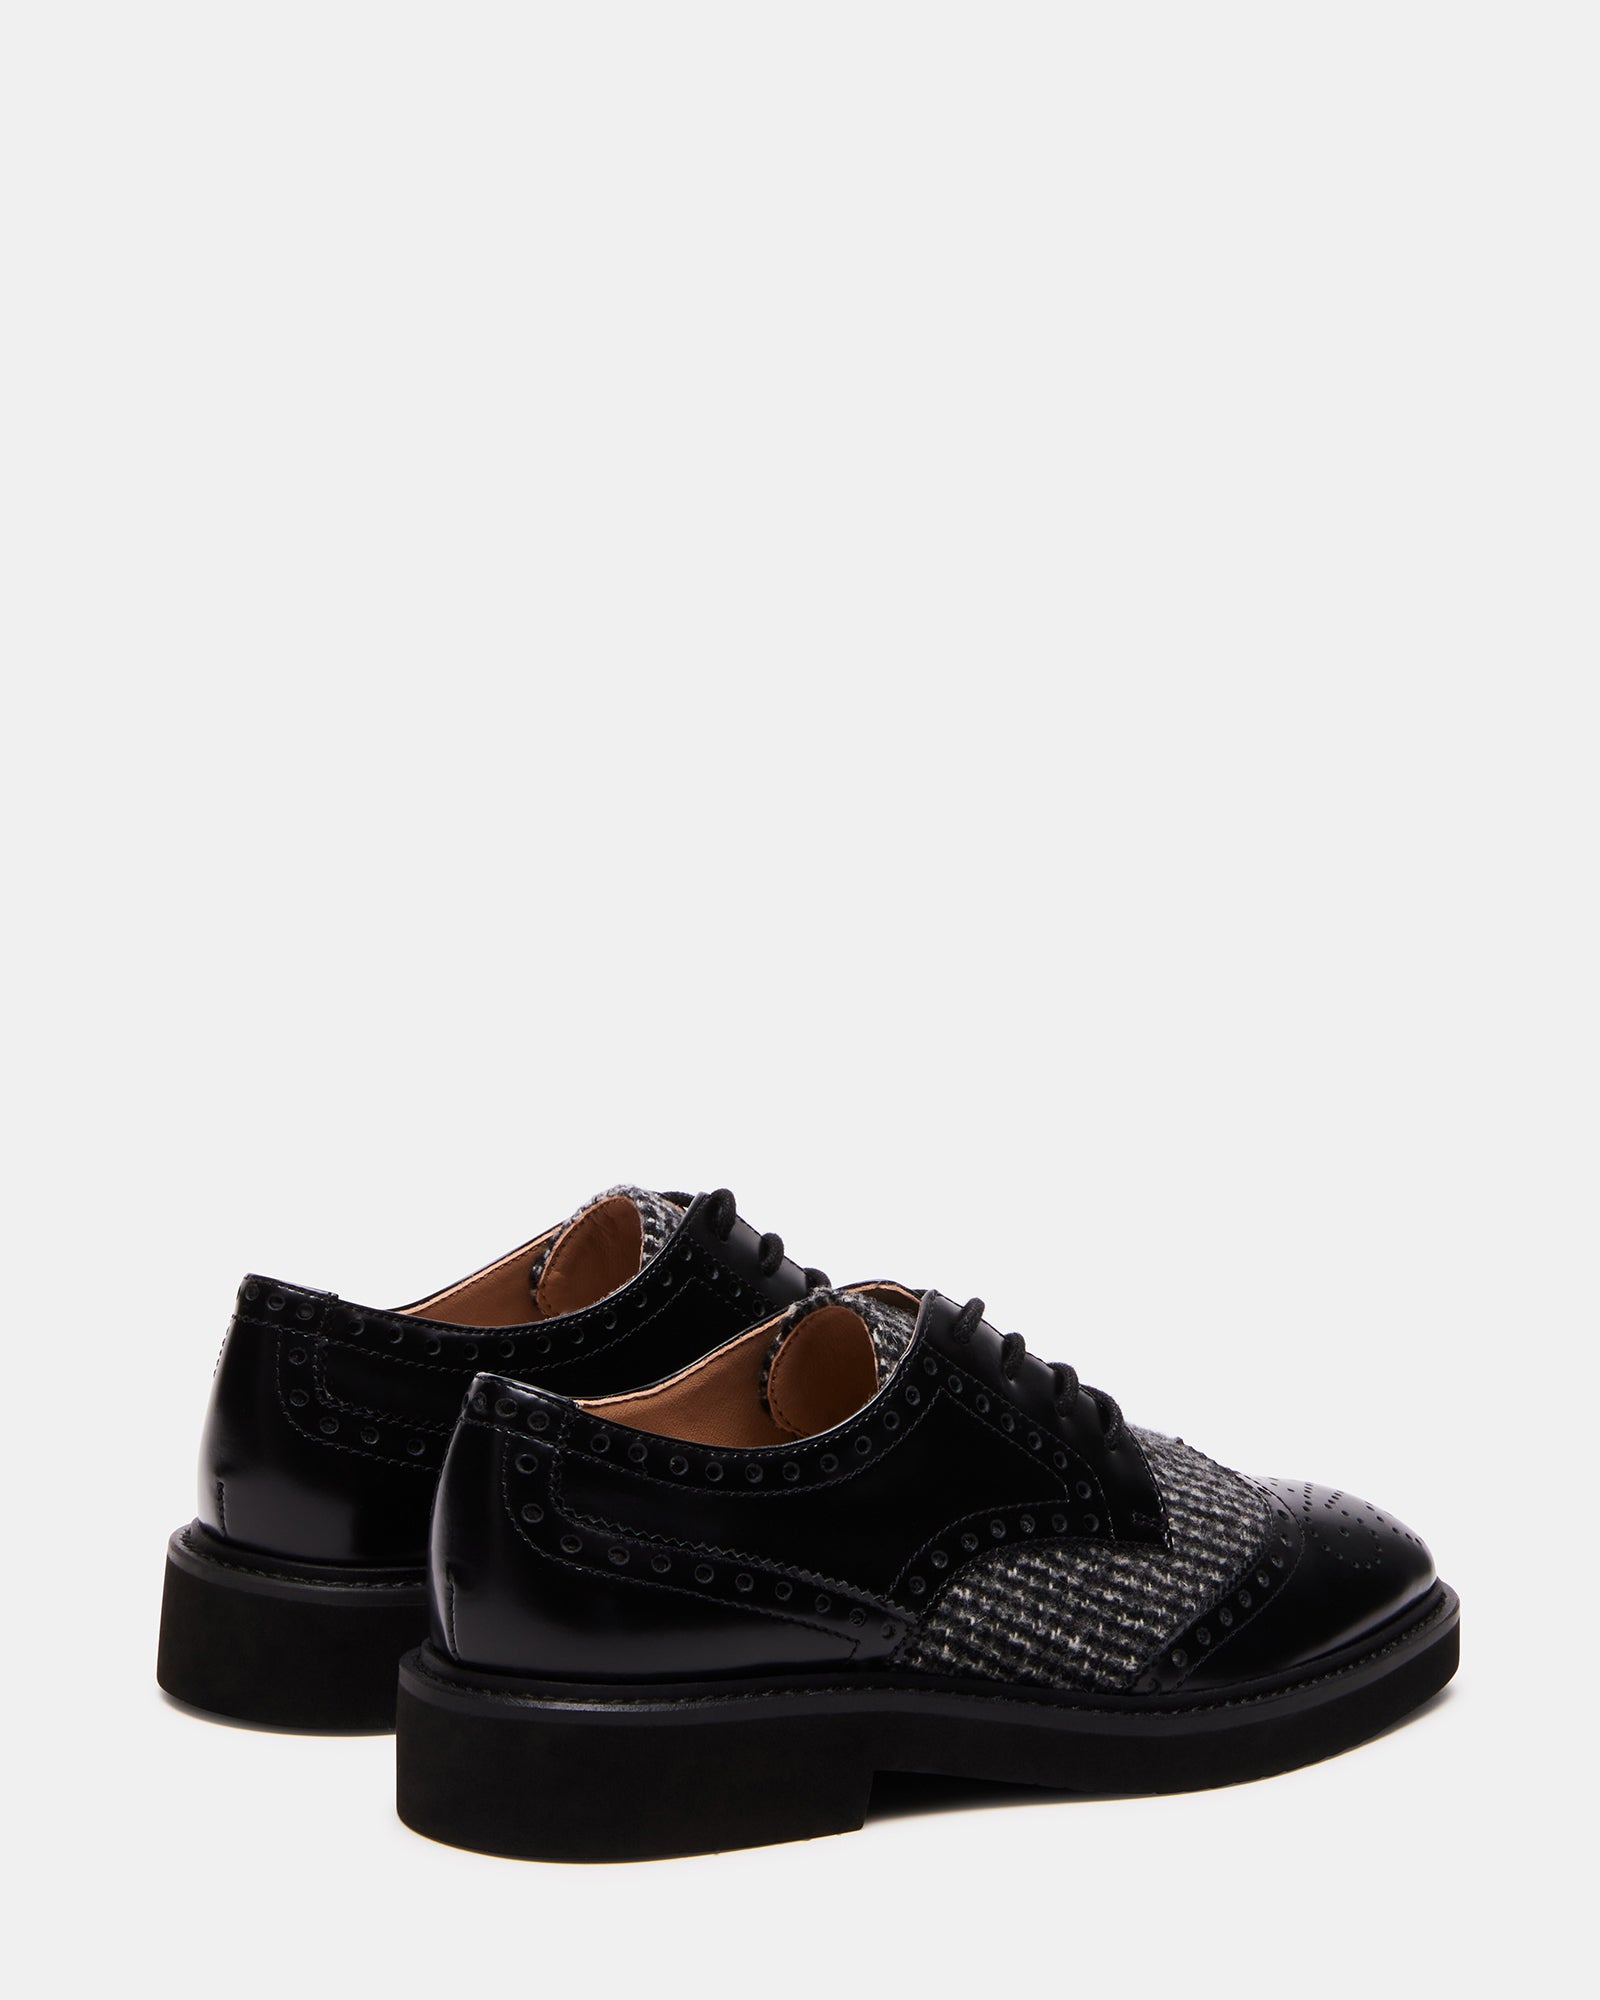 FREDDY Black Multi Tailored Lace Up Loafer | Women's Loafers – Steve Madden